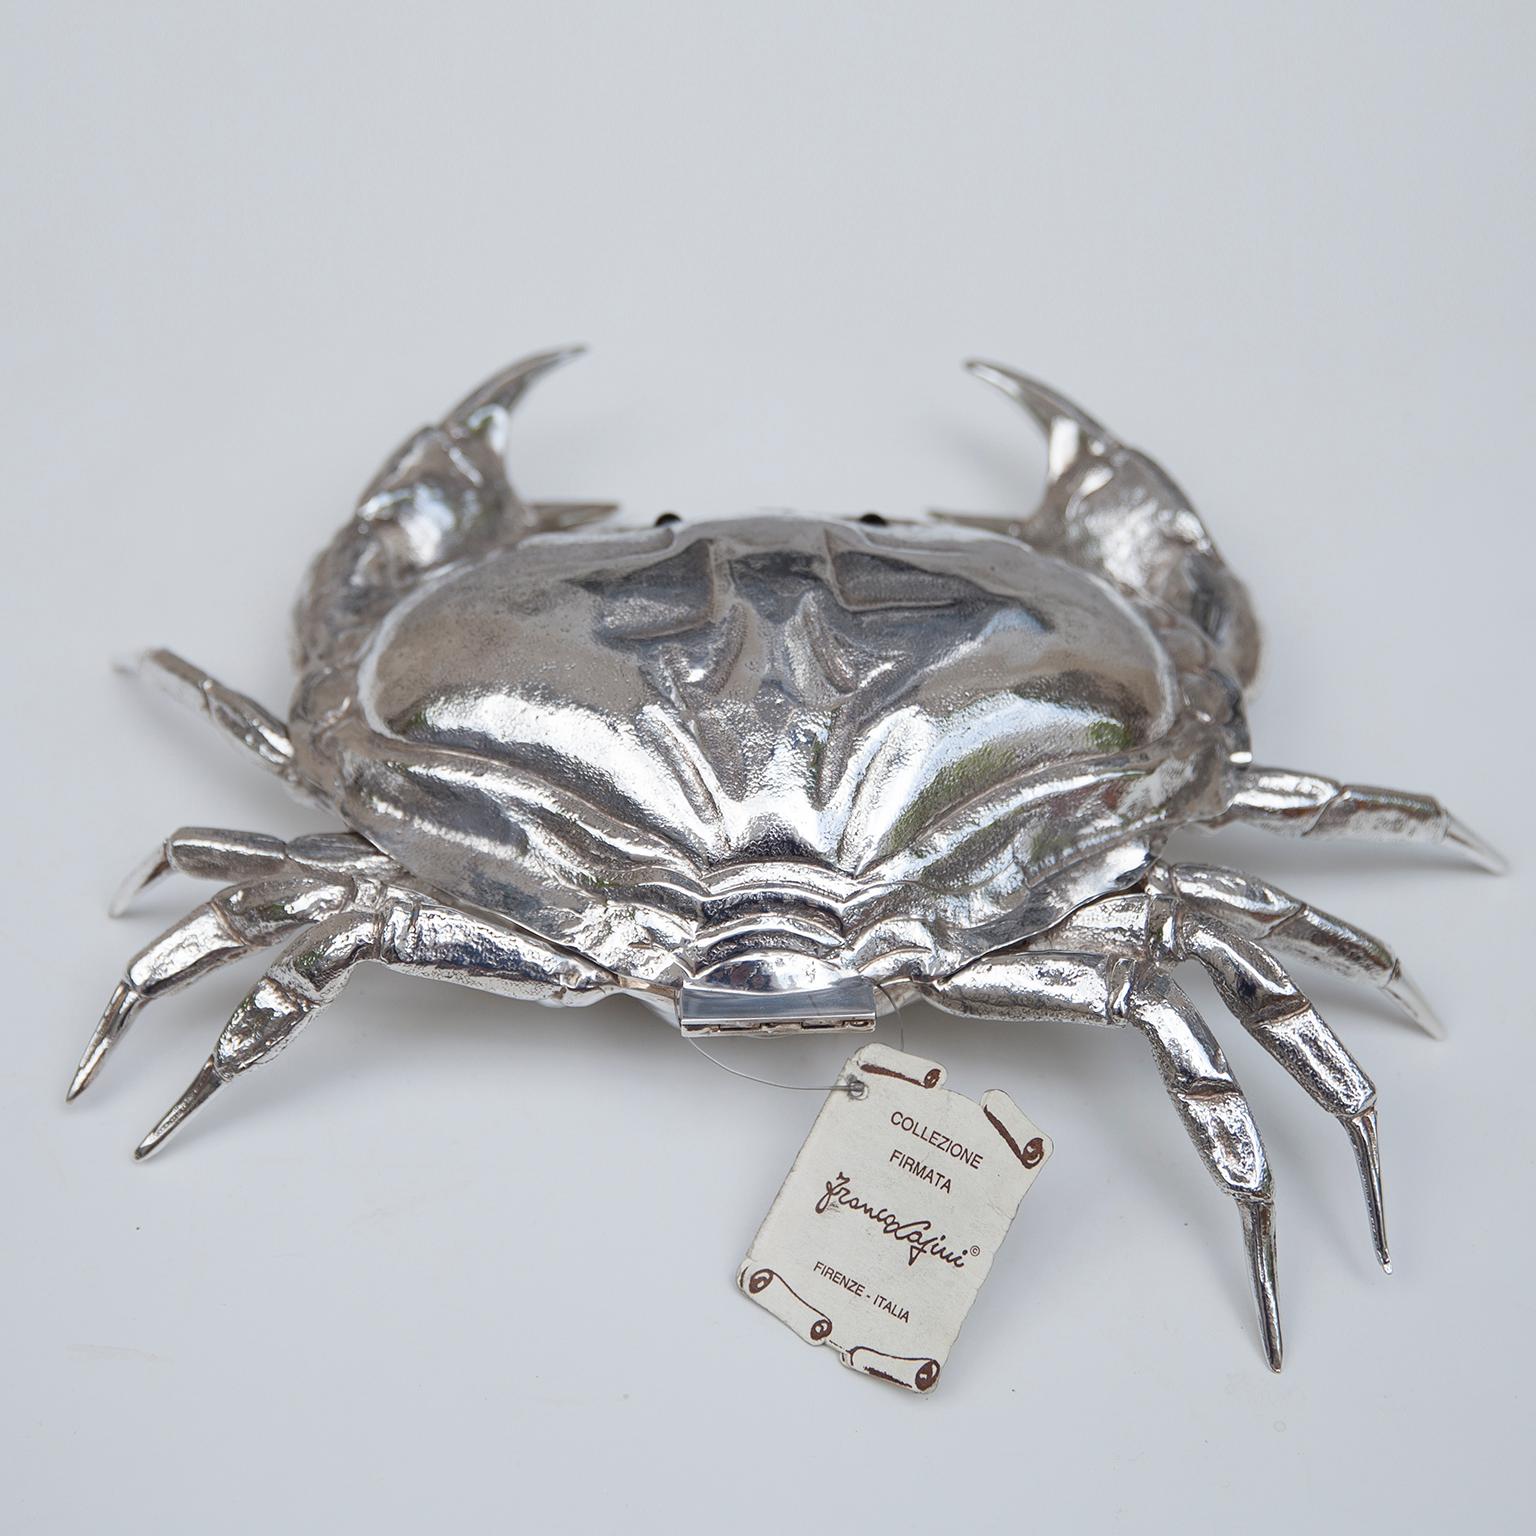 Franco Lapini exquisite crab caviar bowl is made entirely of metal-plated in silver and its surface is lightly textured to give it an organic feel with a blue glass inlay. Either alone or combined with other pieces by the same designer, this object